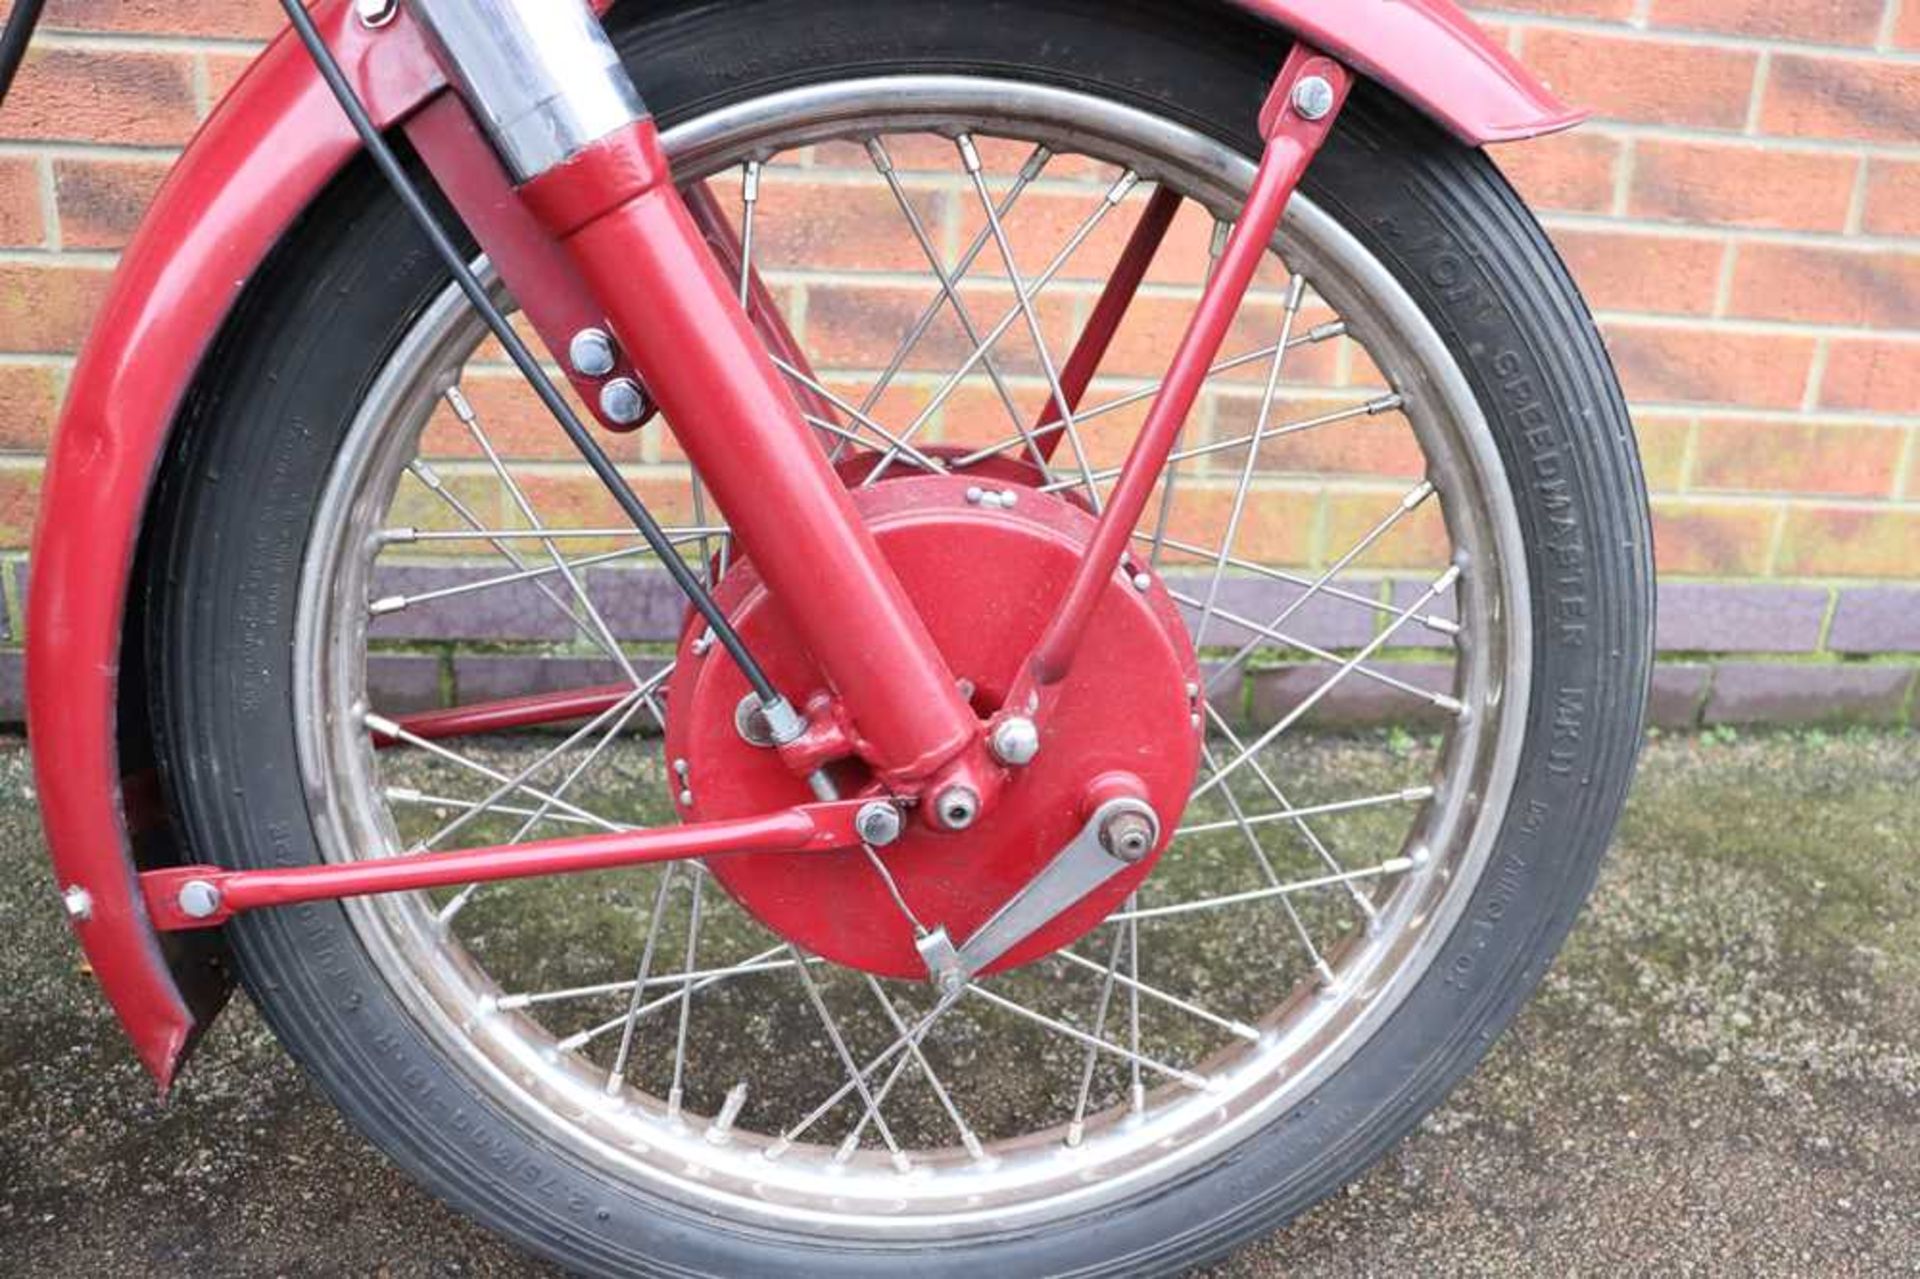 1956 BSA C12 Stainless steel rims and spokes - Image 23 of 44